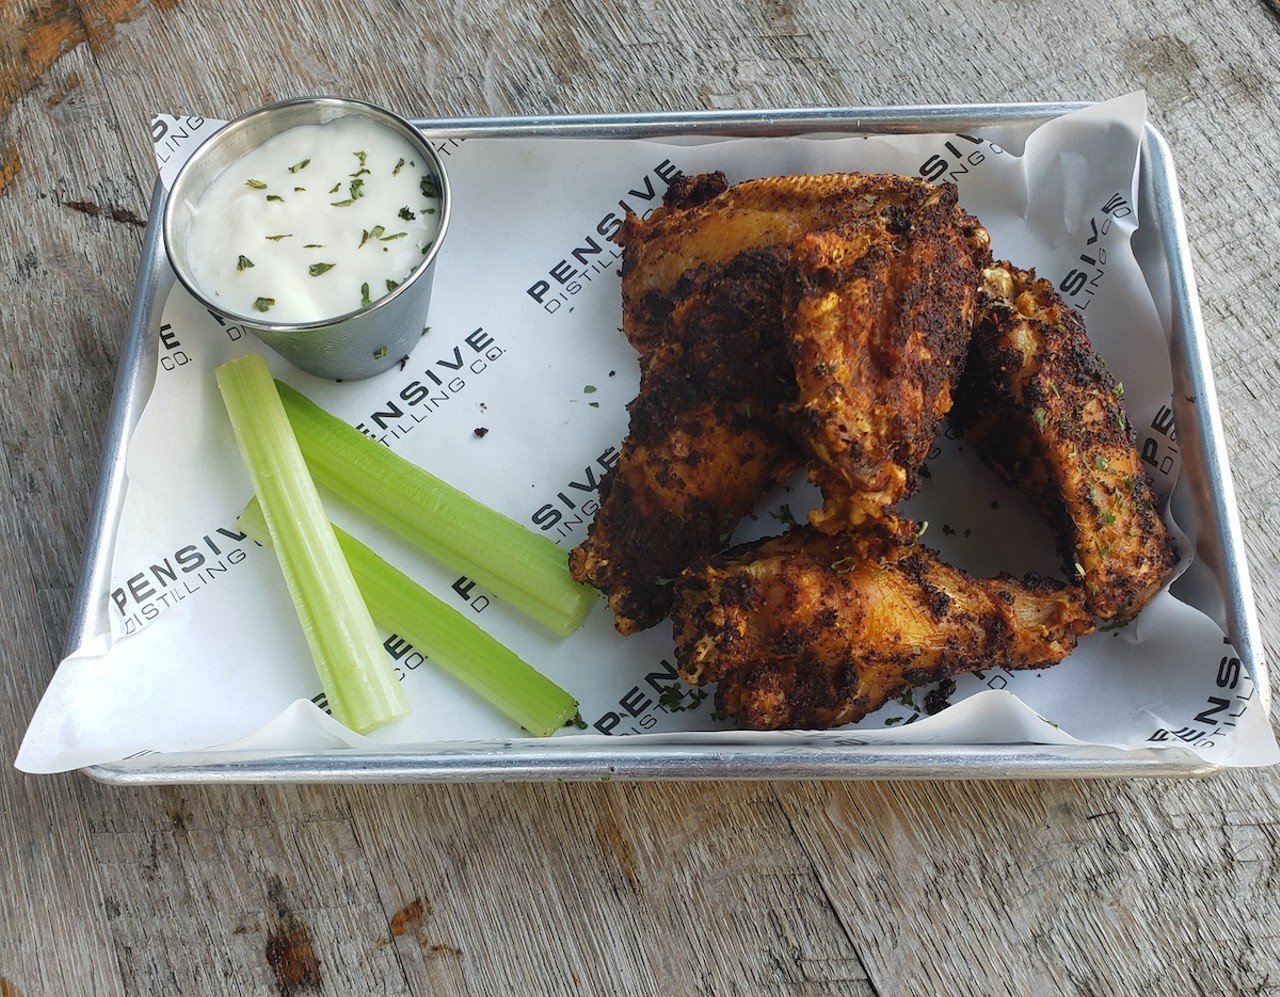 Pensive Distilling Company
720 Monmouth St., Newport
Six for $7: Pensive Dry Rub Wings